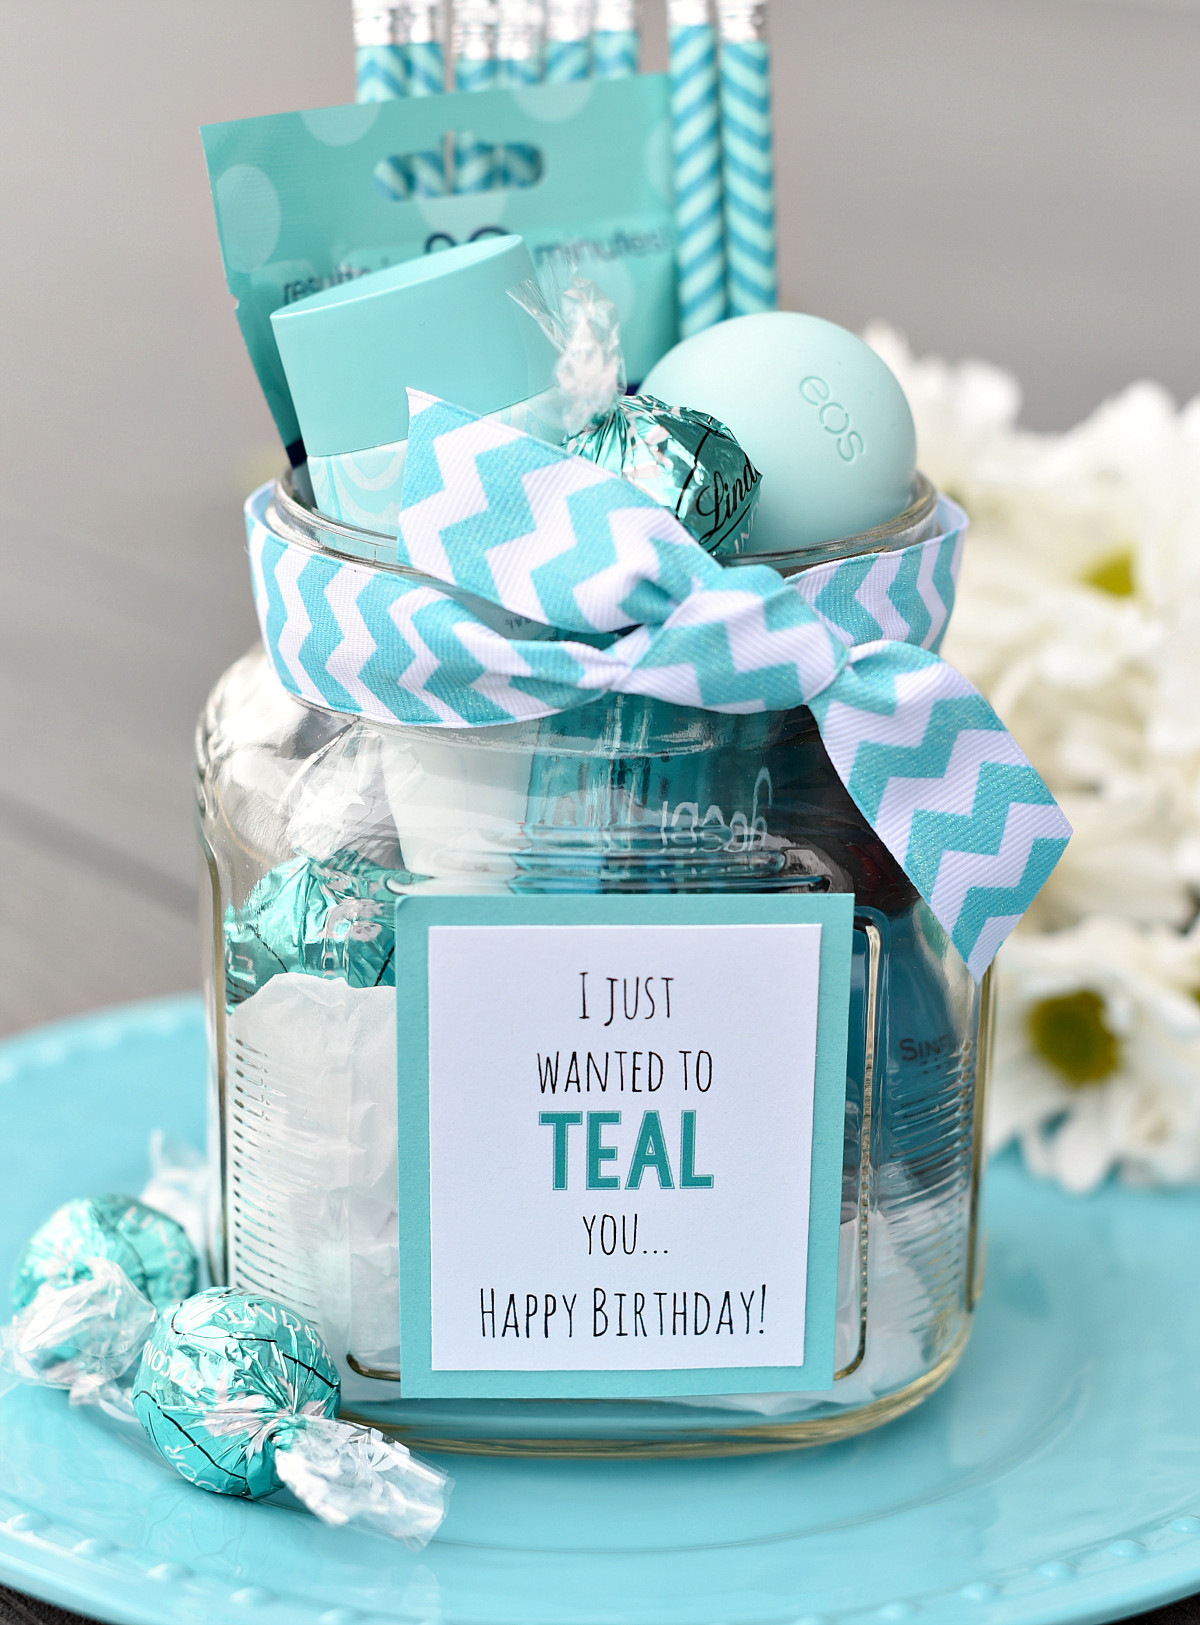 Gift Basket Ideas For Friend
 Teal Birthday Gift Idea for Friends – Fun Squared